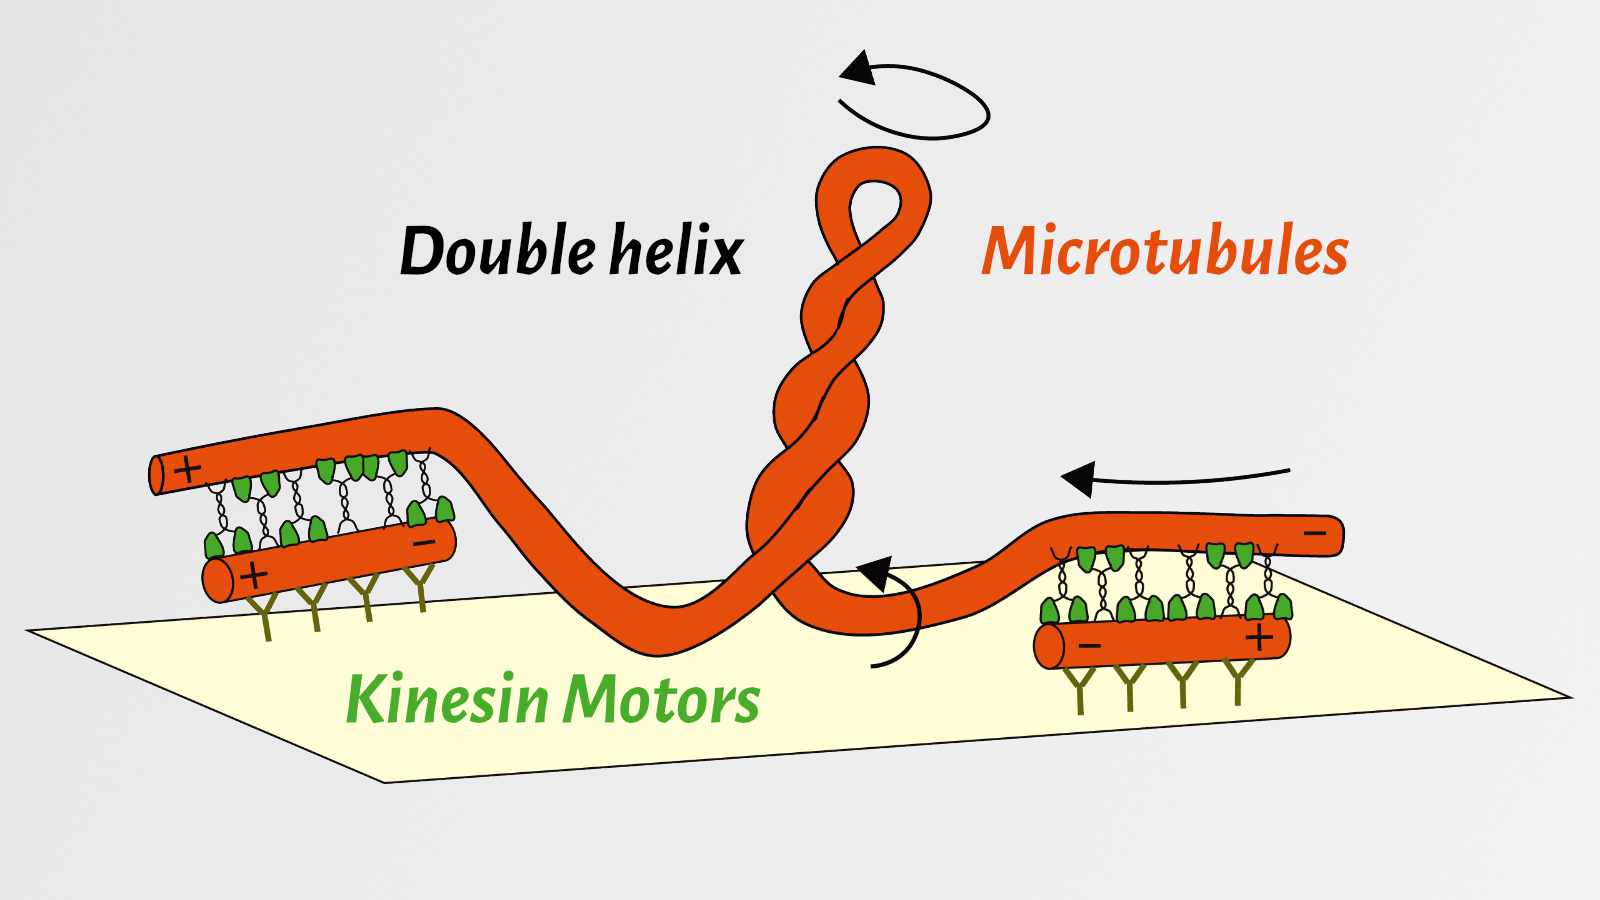 Schematic showing the generation of twist and torque between cross-linked microtubules